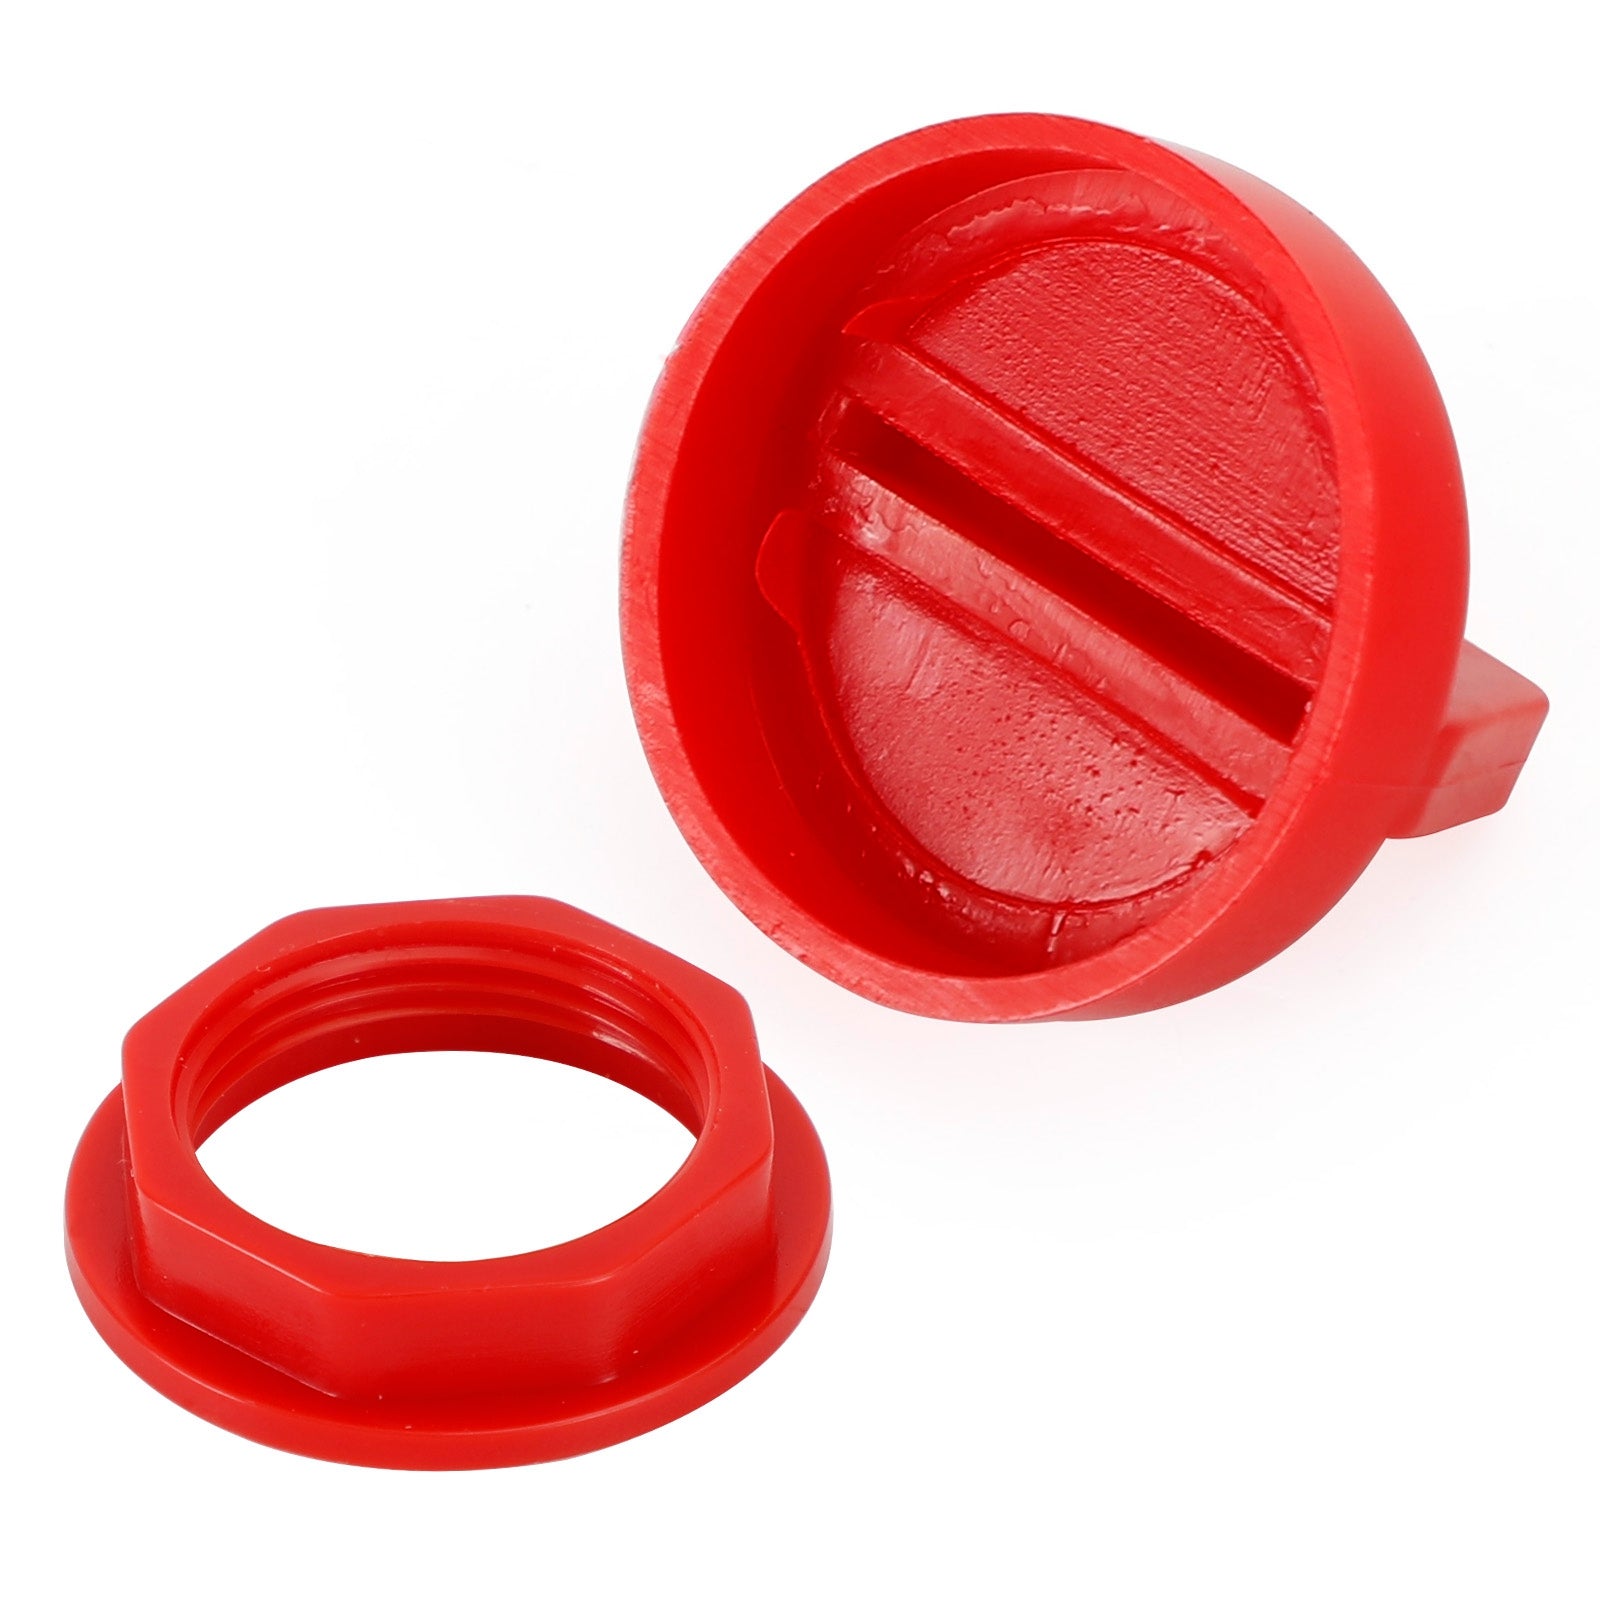 2 Pack Red Ignition Key Cover w/Nut For Polaris RZR XP 570 800 900 1000 5433534 Generic